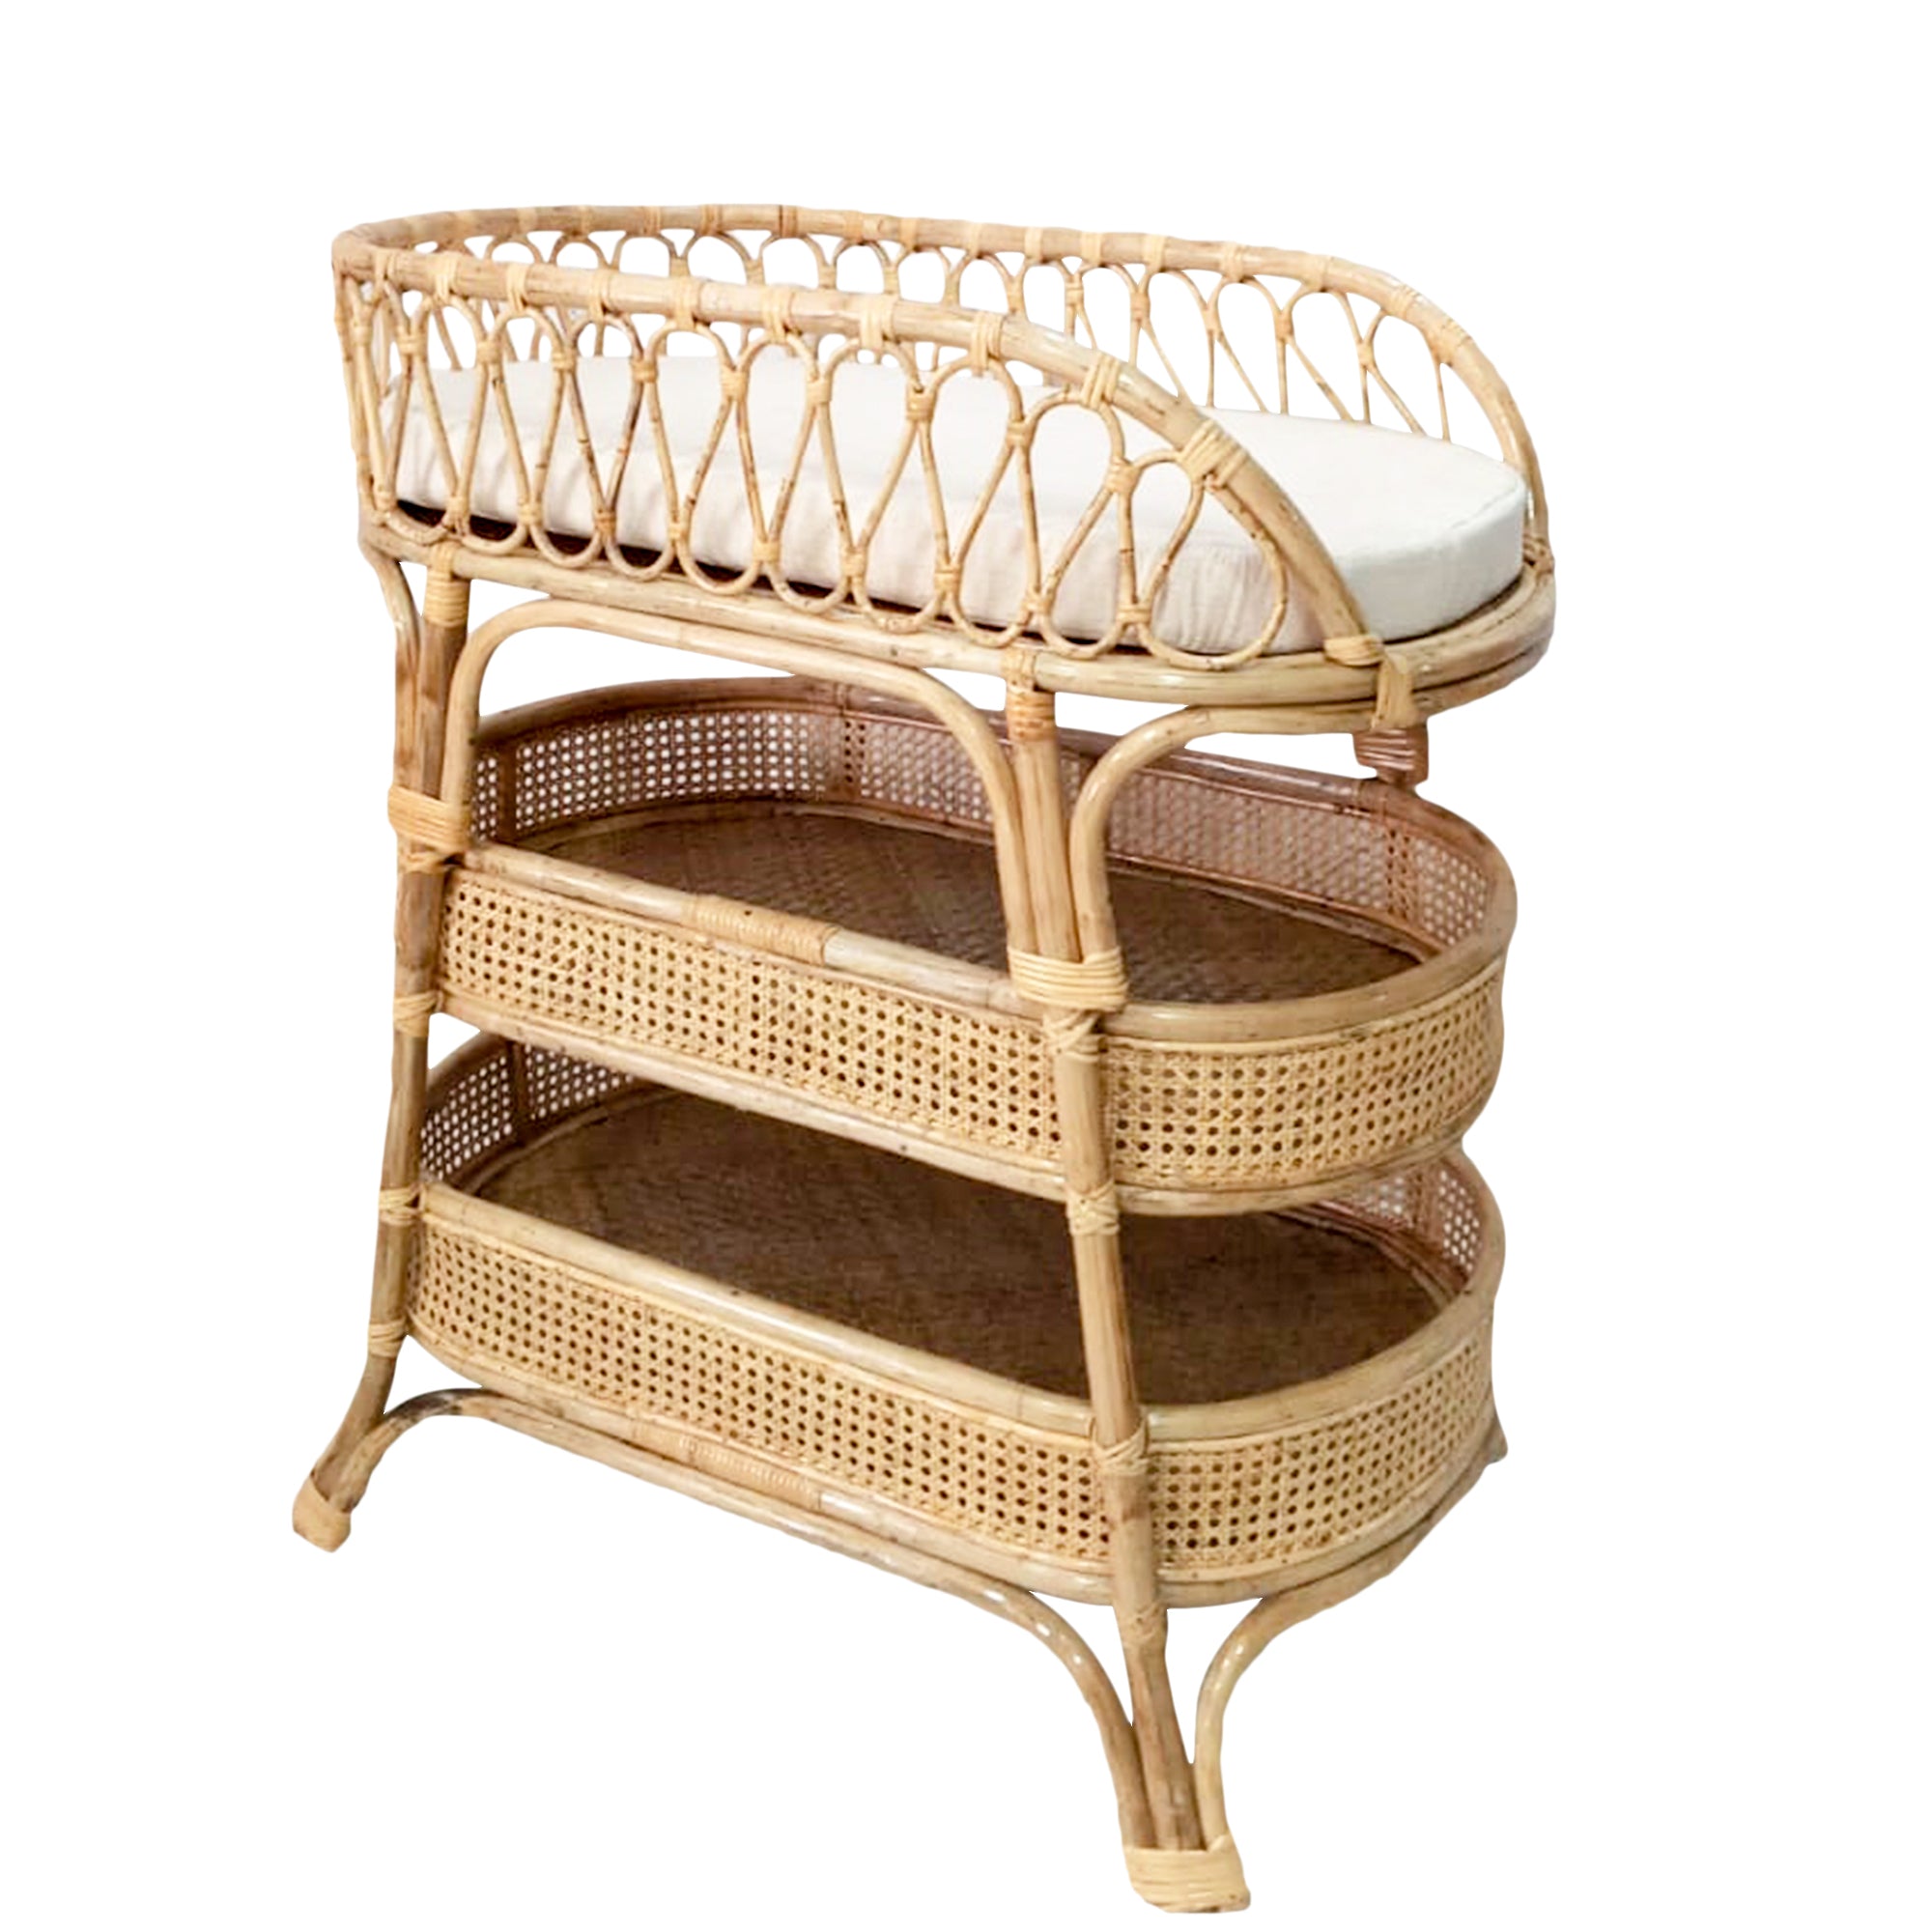 IRA New Born Baby Wicker Bassinet with cushion and Tray to keep accessories.